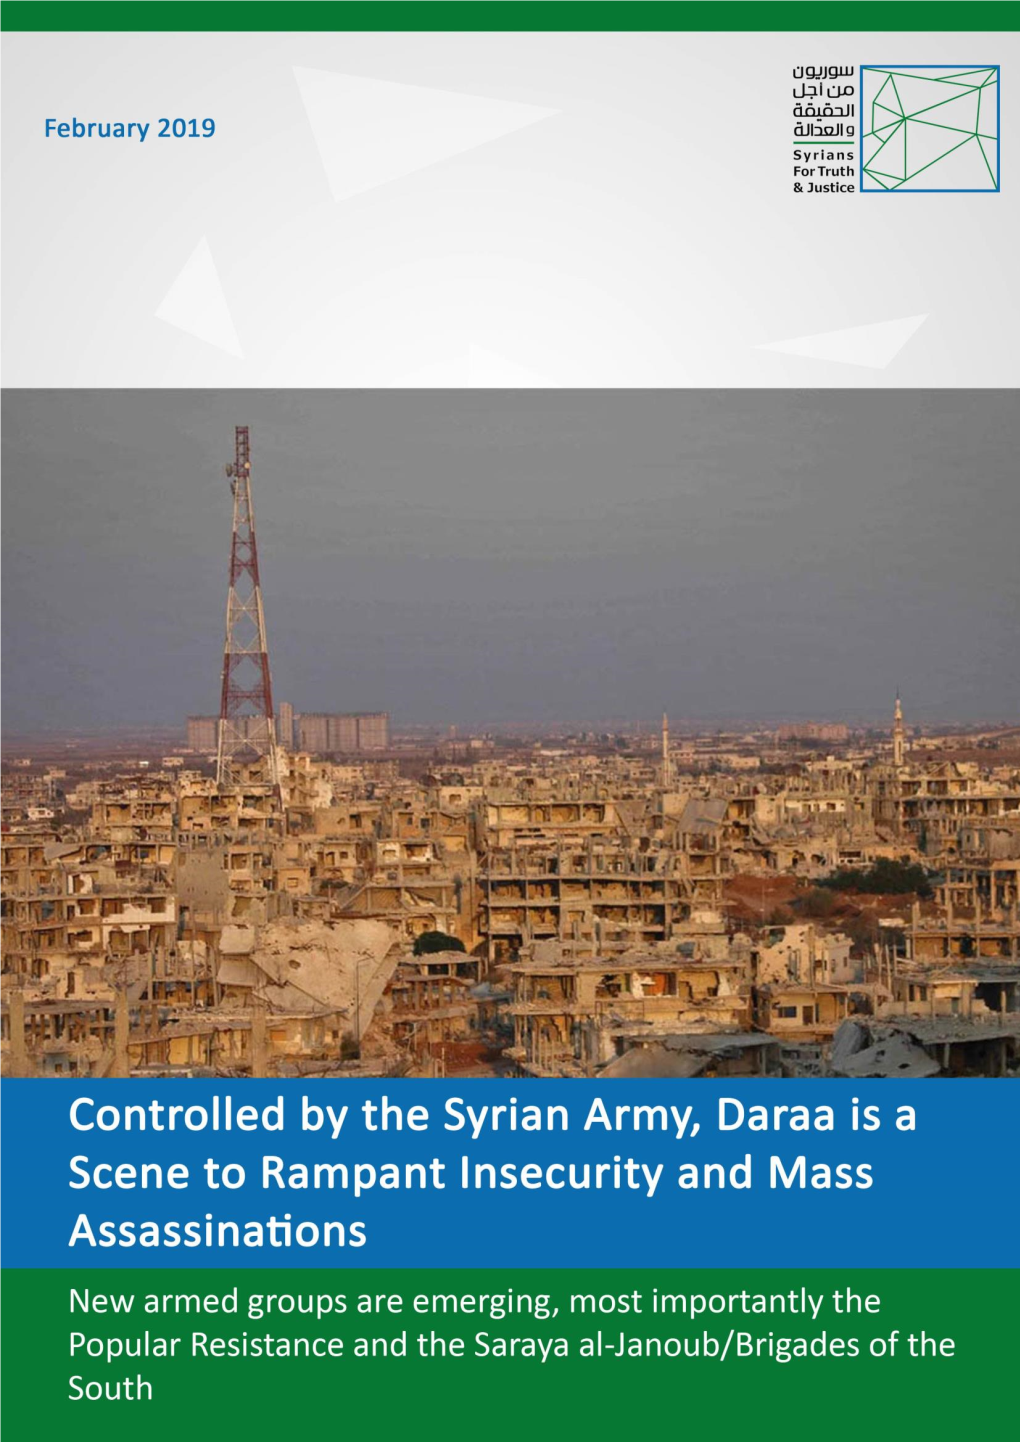 Controlled by the Syrian Army, Daraa Is a Scene to Rampant Insecurity and Mass Assassinations